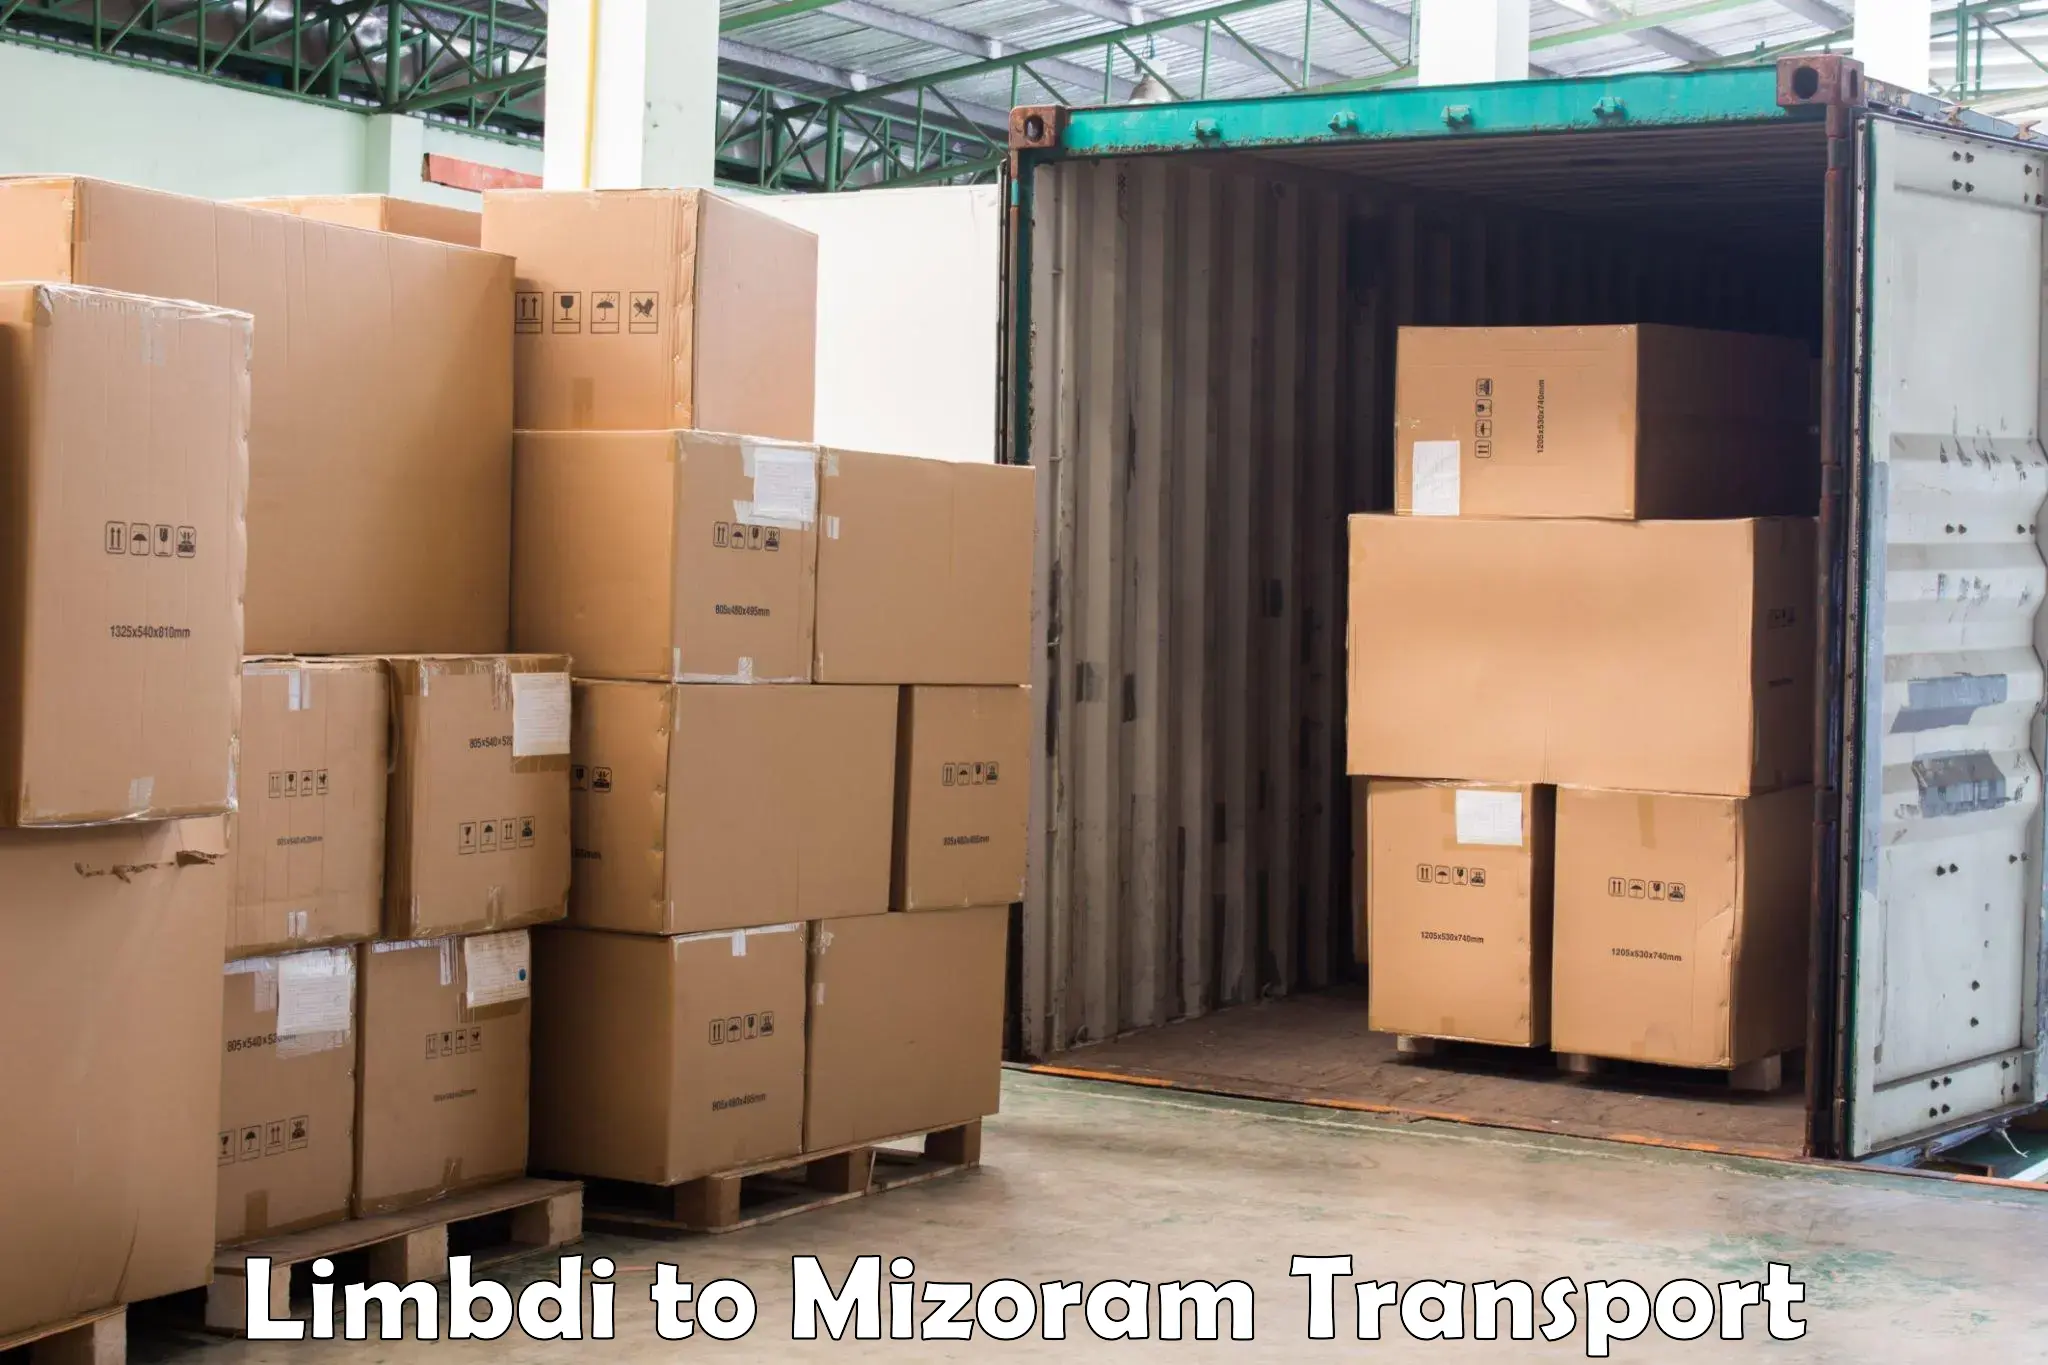 Transport bike from one state to another Limbdi to Mizoram